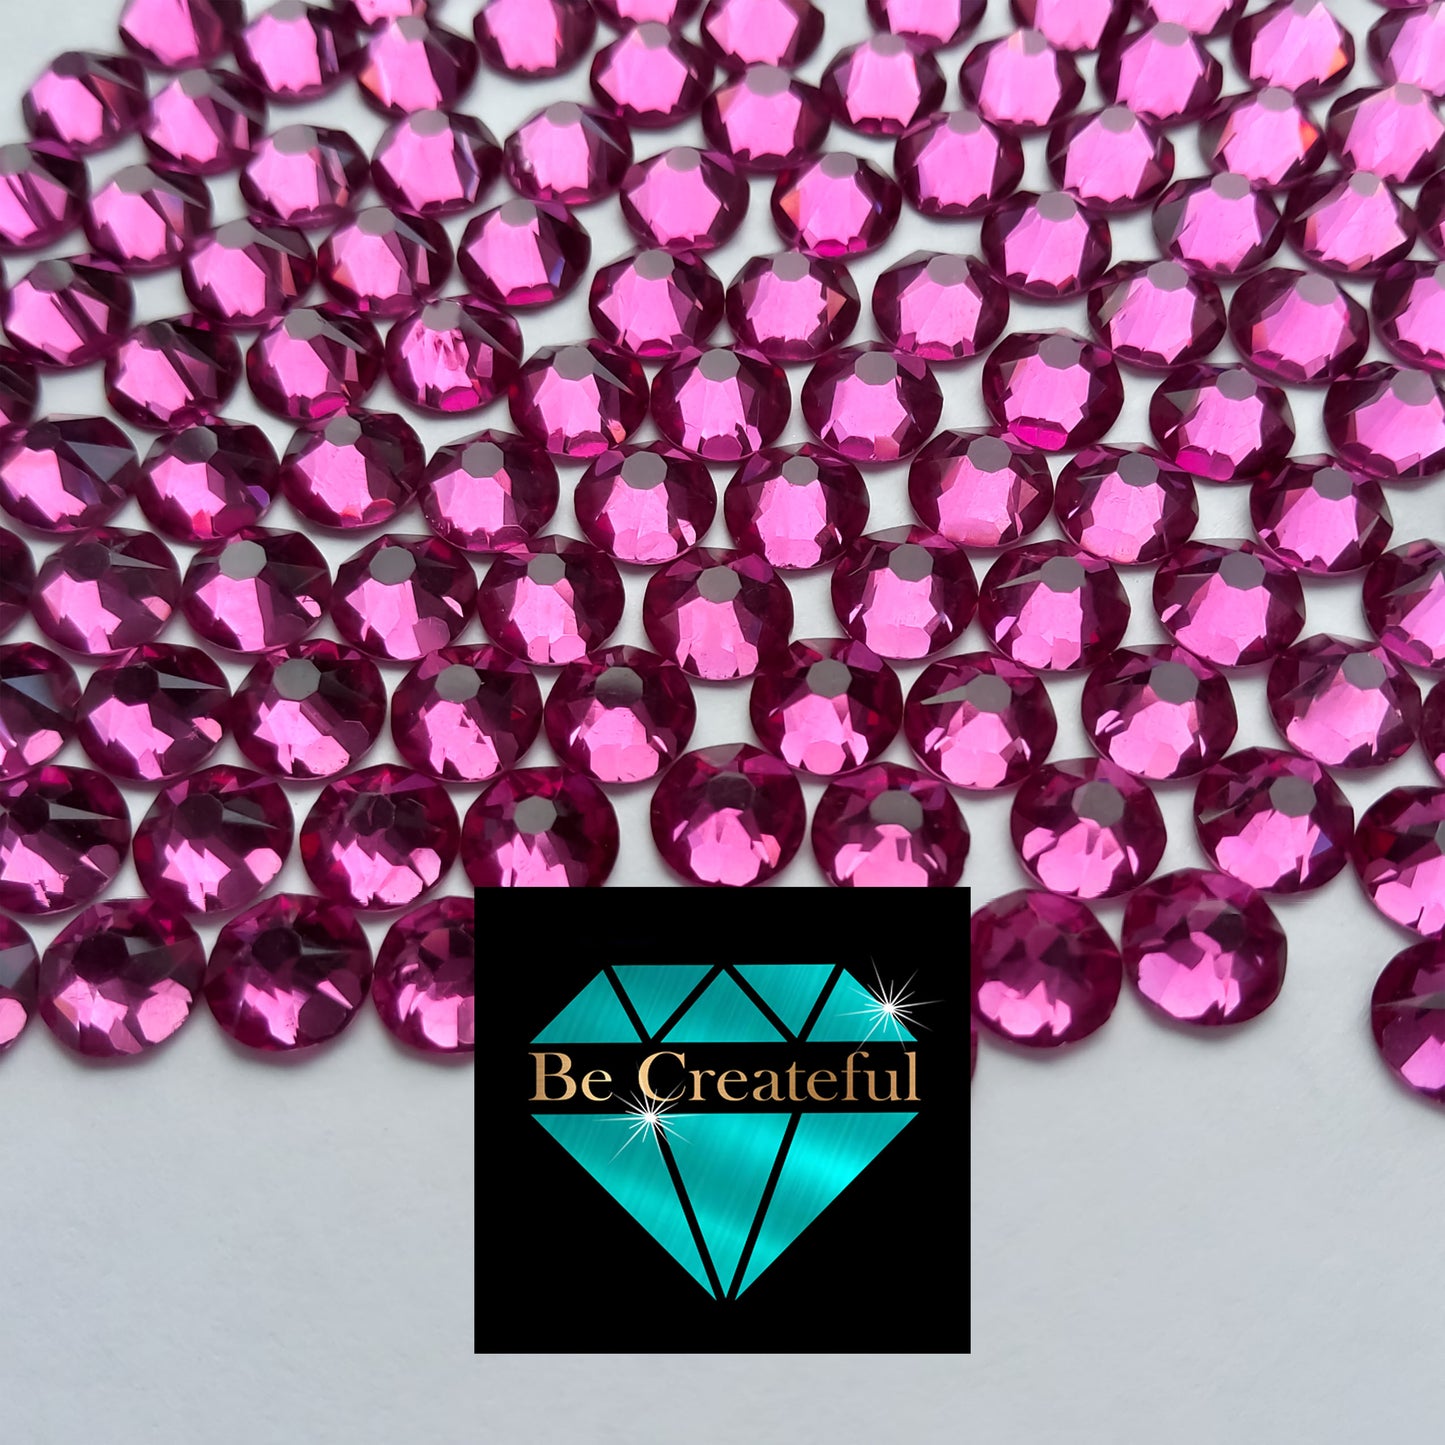 LUXE® Hot Pink Fuchsia Hotfix Rhinestones are high-quality 14-16 facet glass Rhinestone that provides intense sparkle and refraction. LUXE® Hotfix rhinestones are known for their brilliant sparkle, made possible with their precision-cut facets. LUXE® Rhinestones provide high-end sparkle without the high-end price.